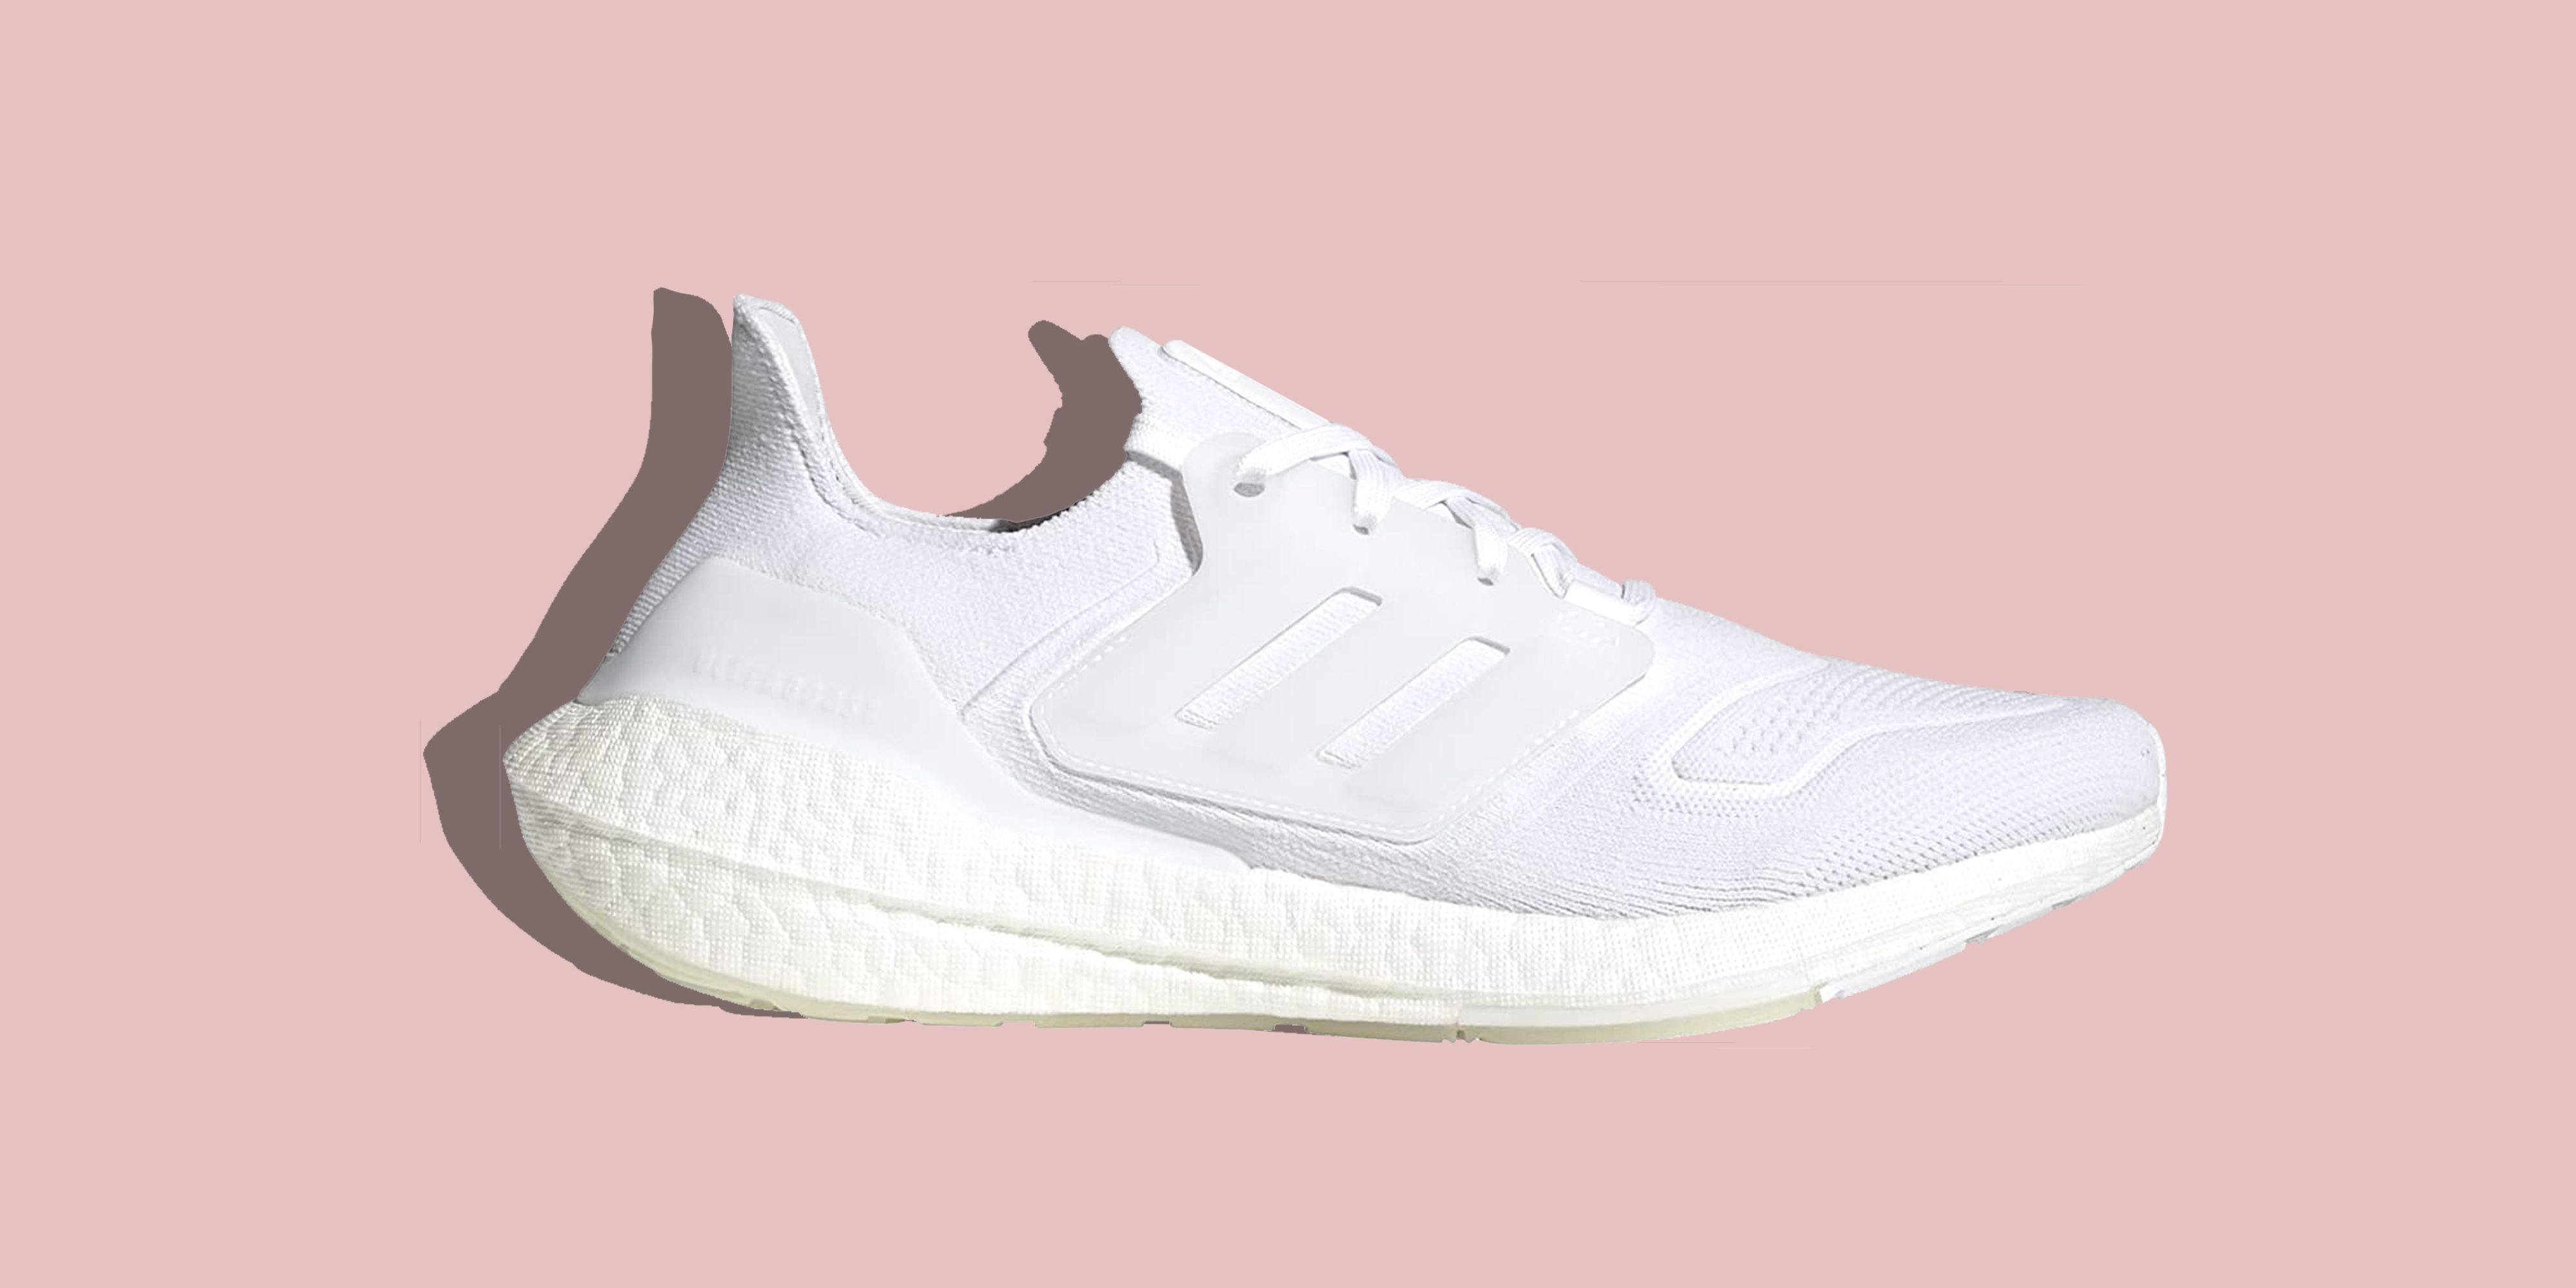 The Adidas Ultraboost 22 Is Up To 50% Off on